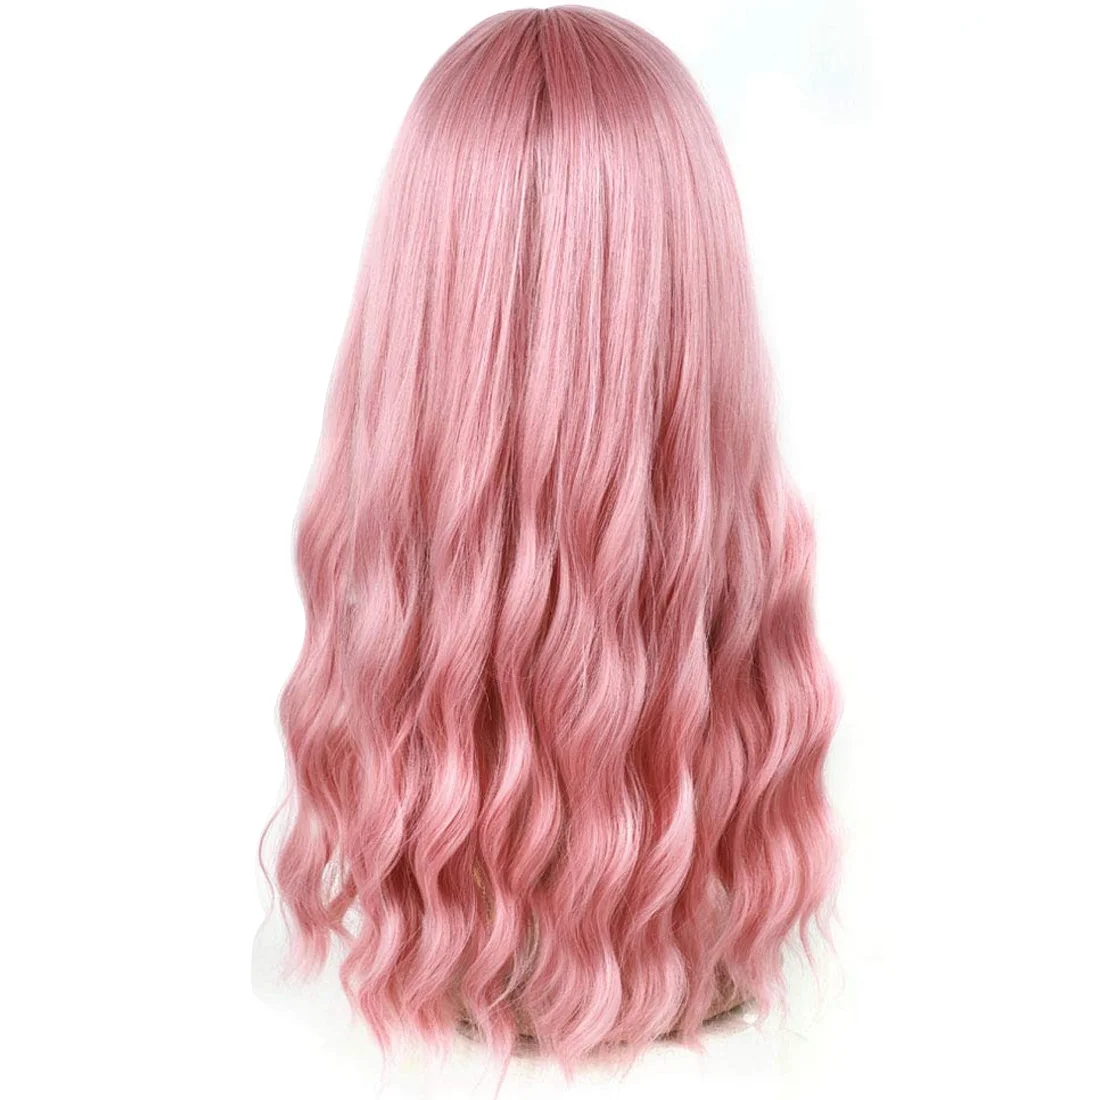 

Pink Wig with Bangs Long Wavy Wig with Air Bangs Silky Full Heat Resistant Wig Hair Replacement Natural Looking Wig